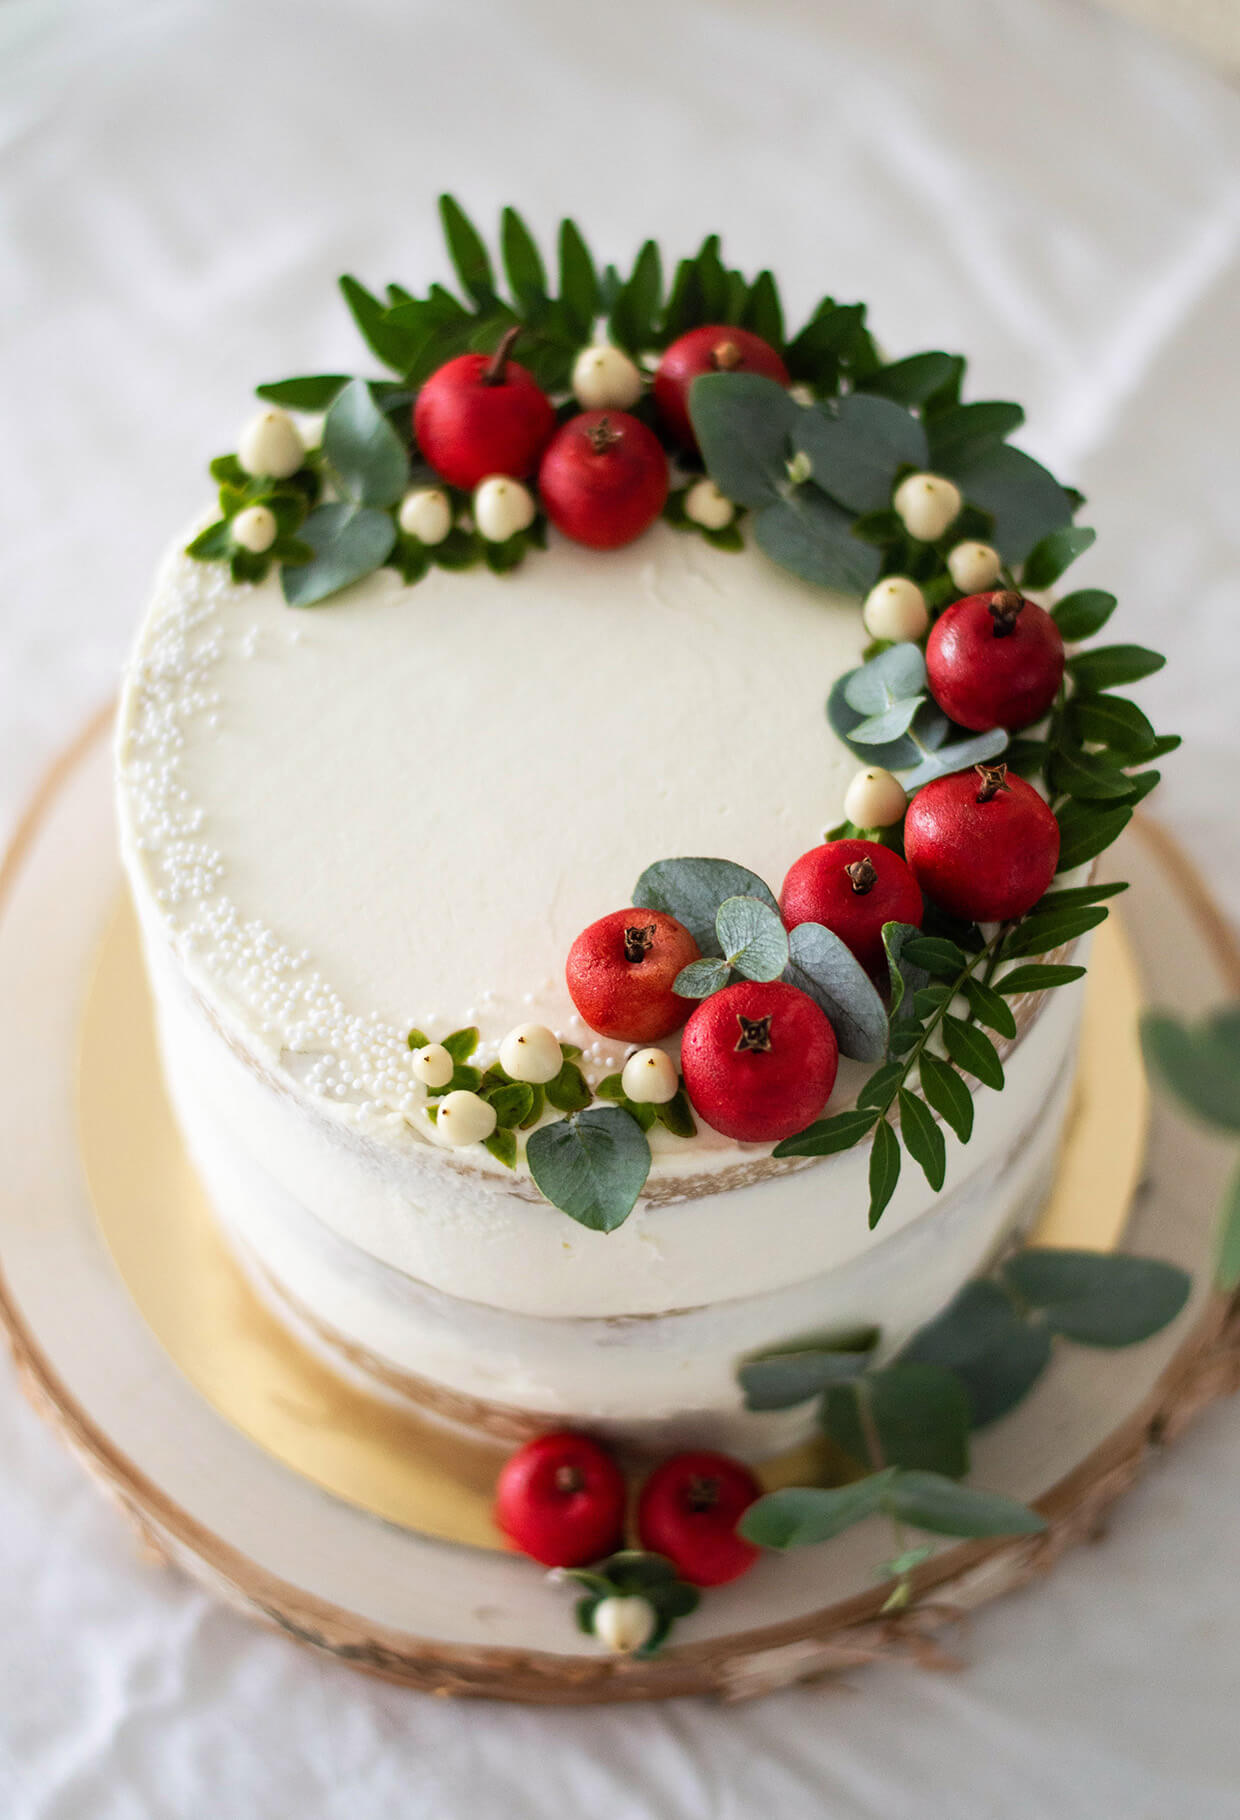 Top view of a layer apple cider cake, decorated with green leaves and mini red apples.